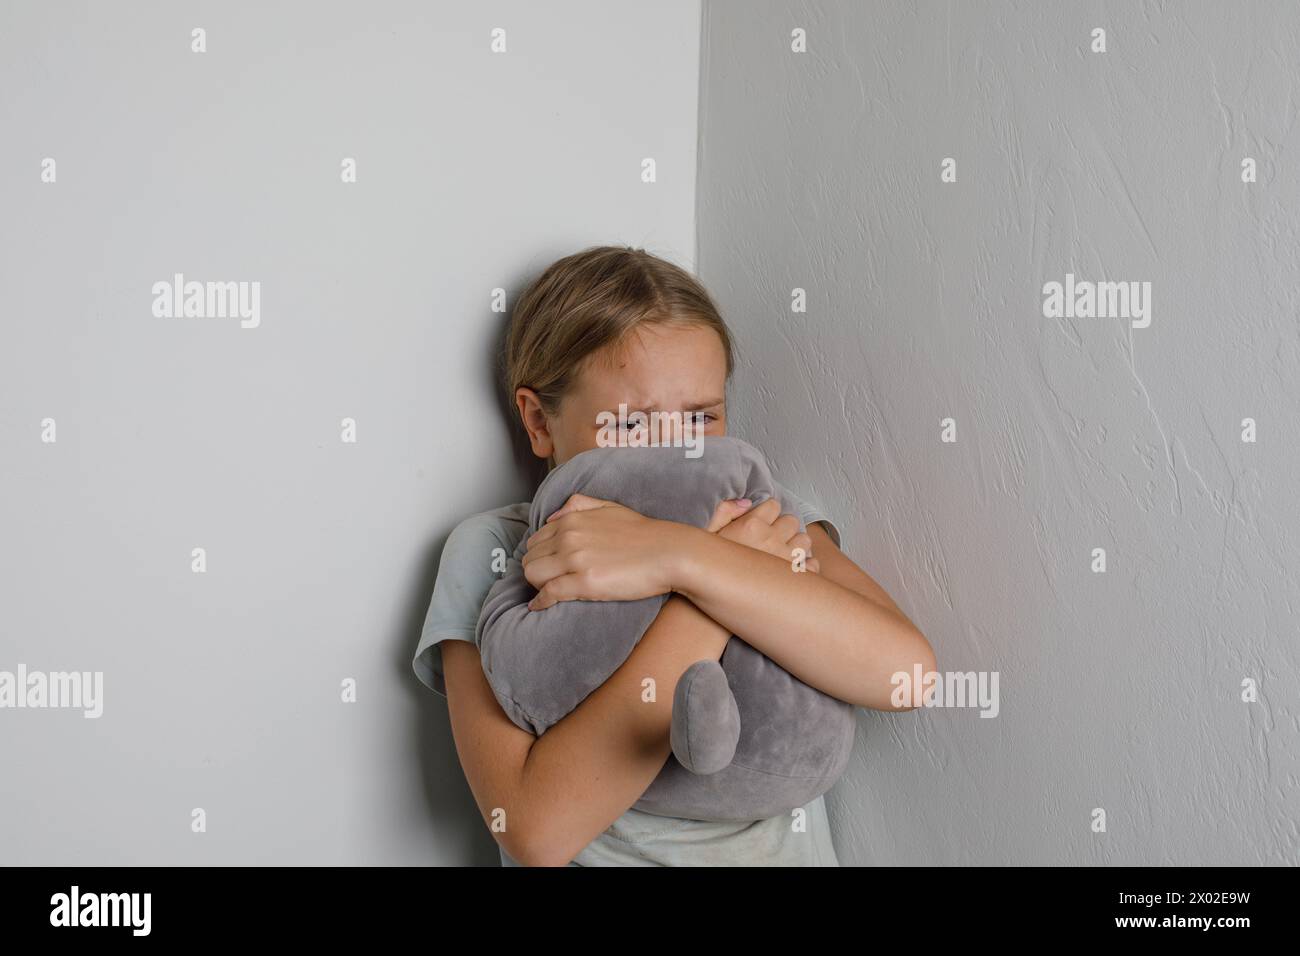 Tired young kid girl crying against white domestic wall at home Stock Photo